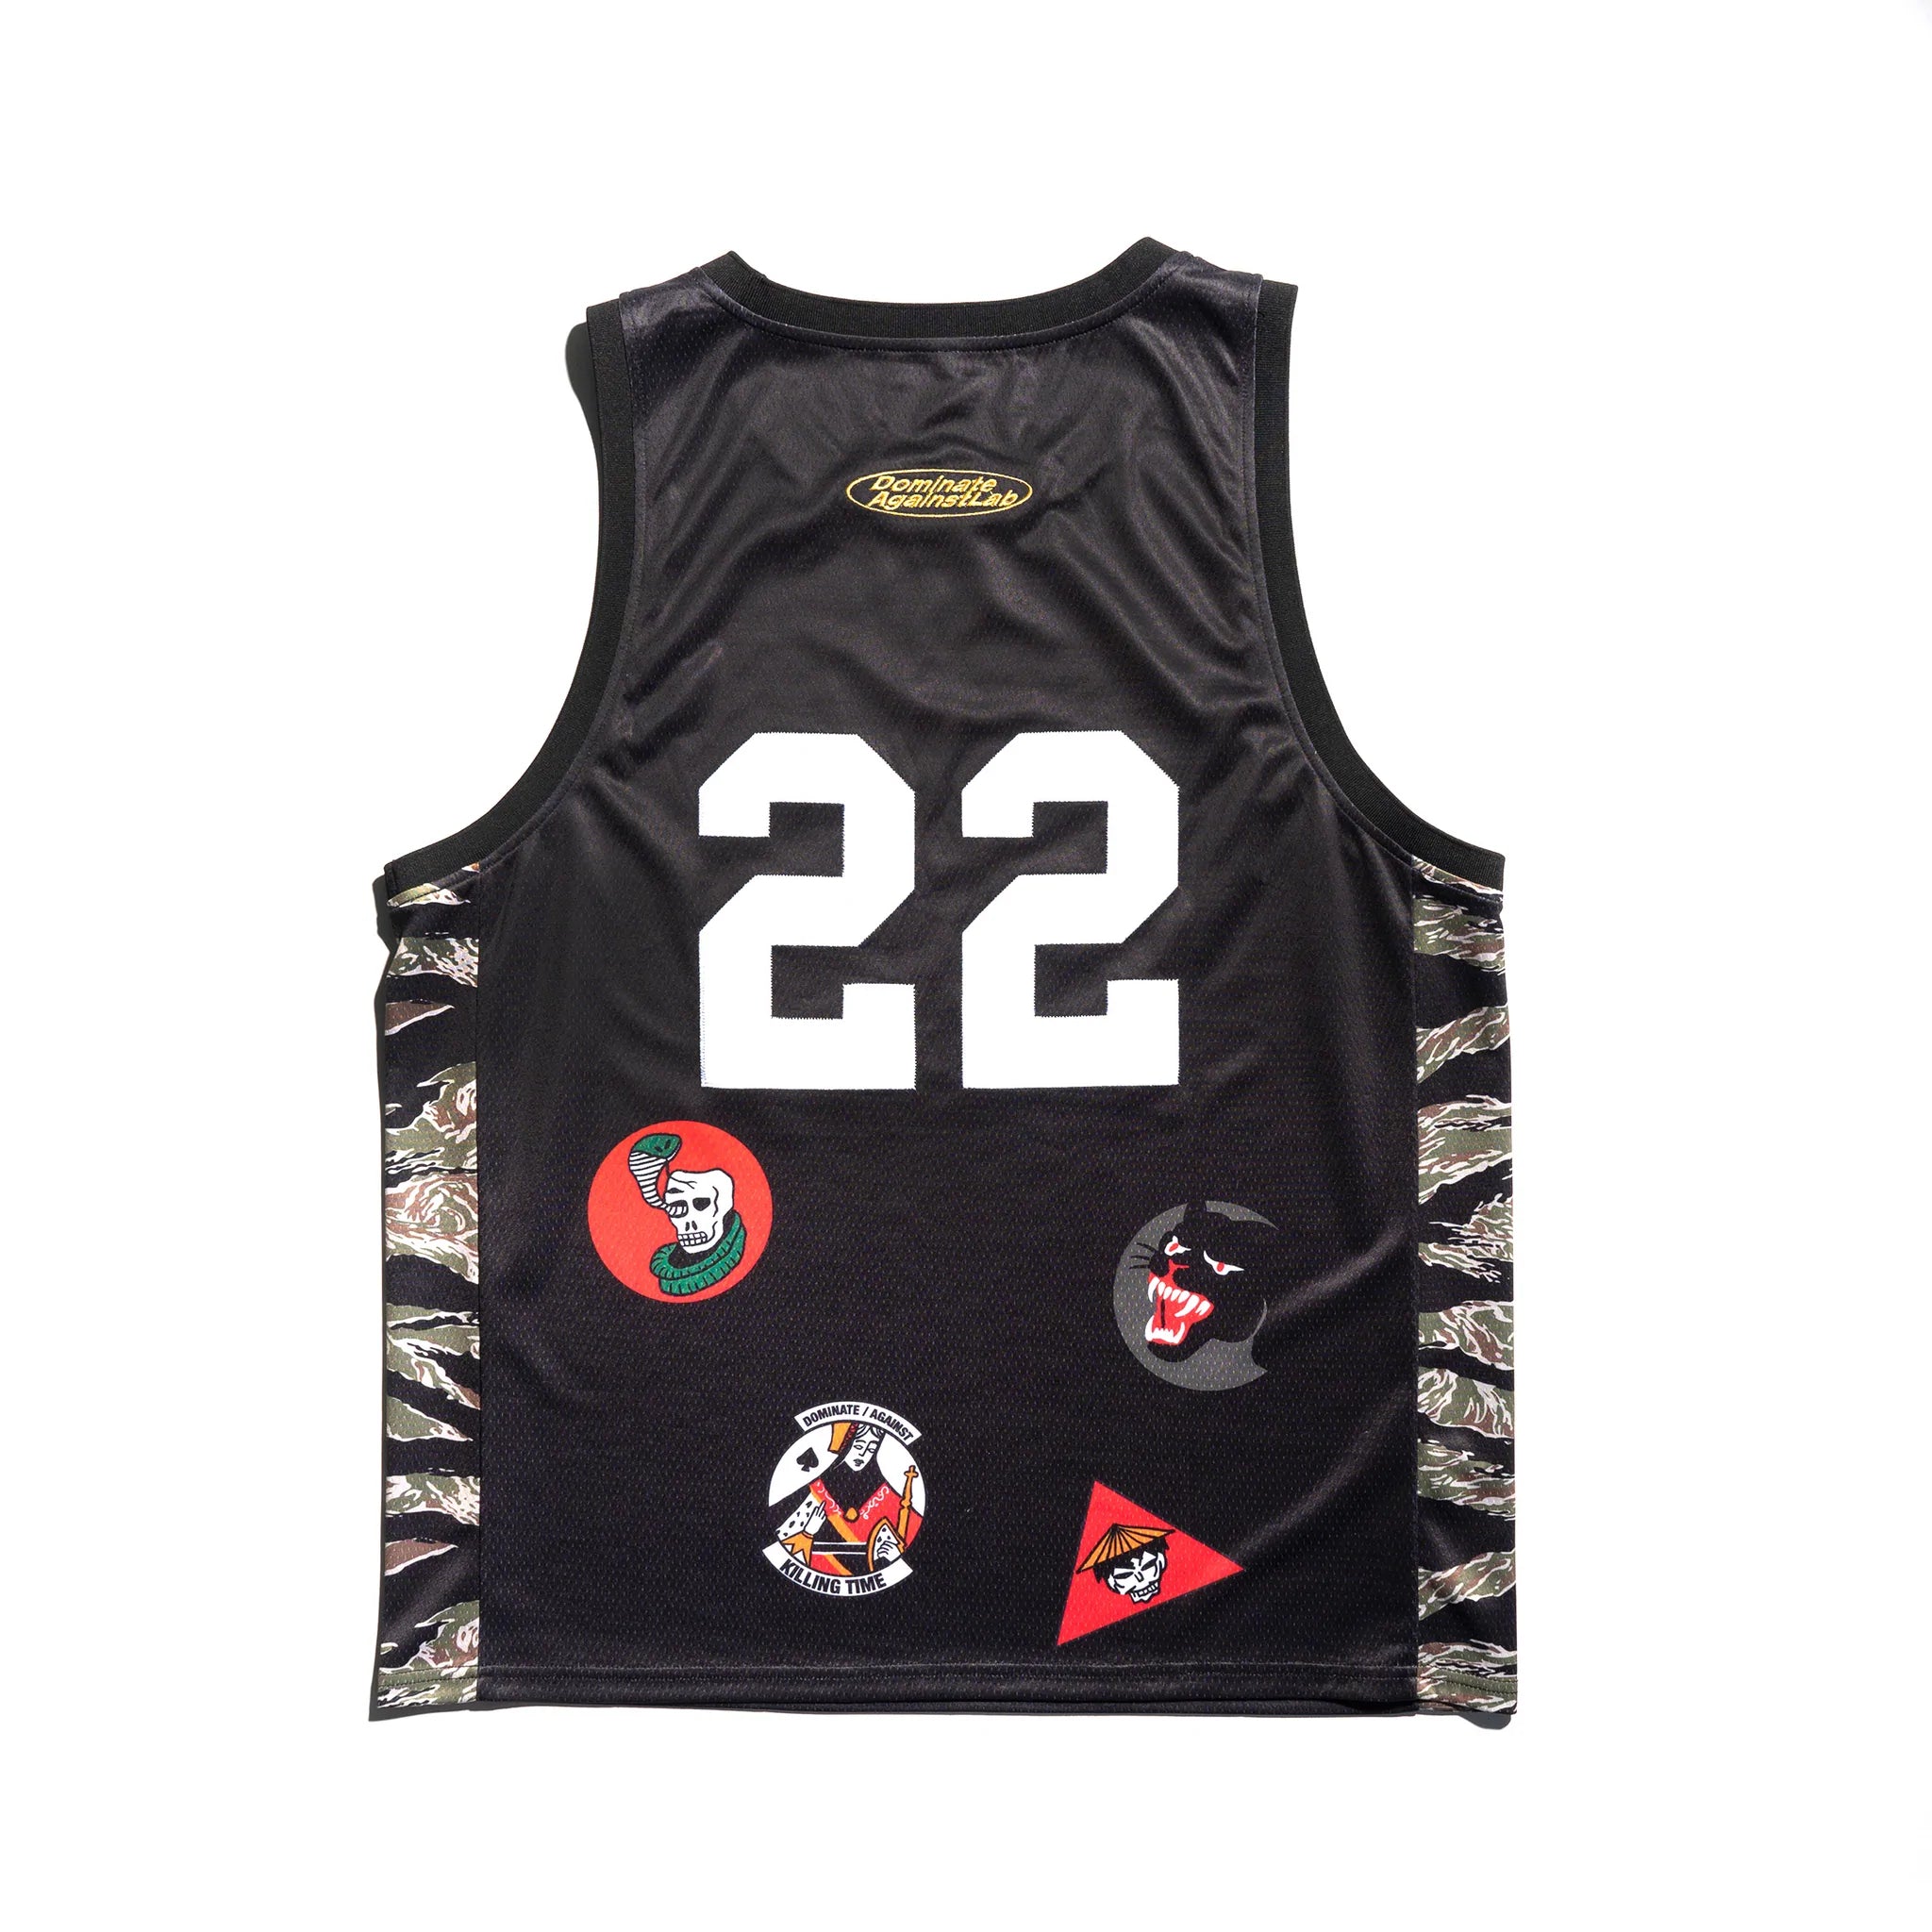 Against Lab x Dominate Patch Mesh Jersey Black